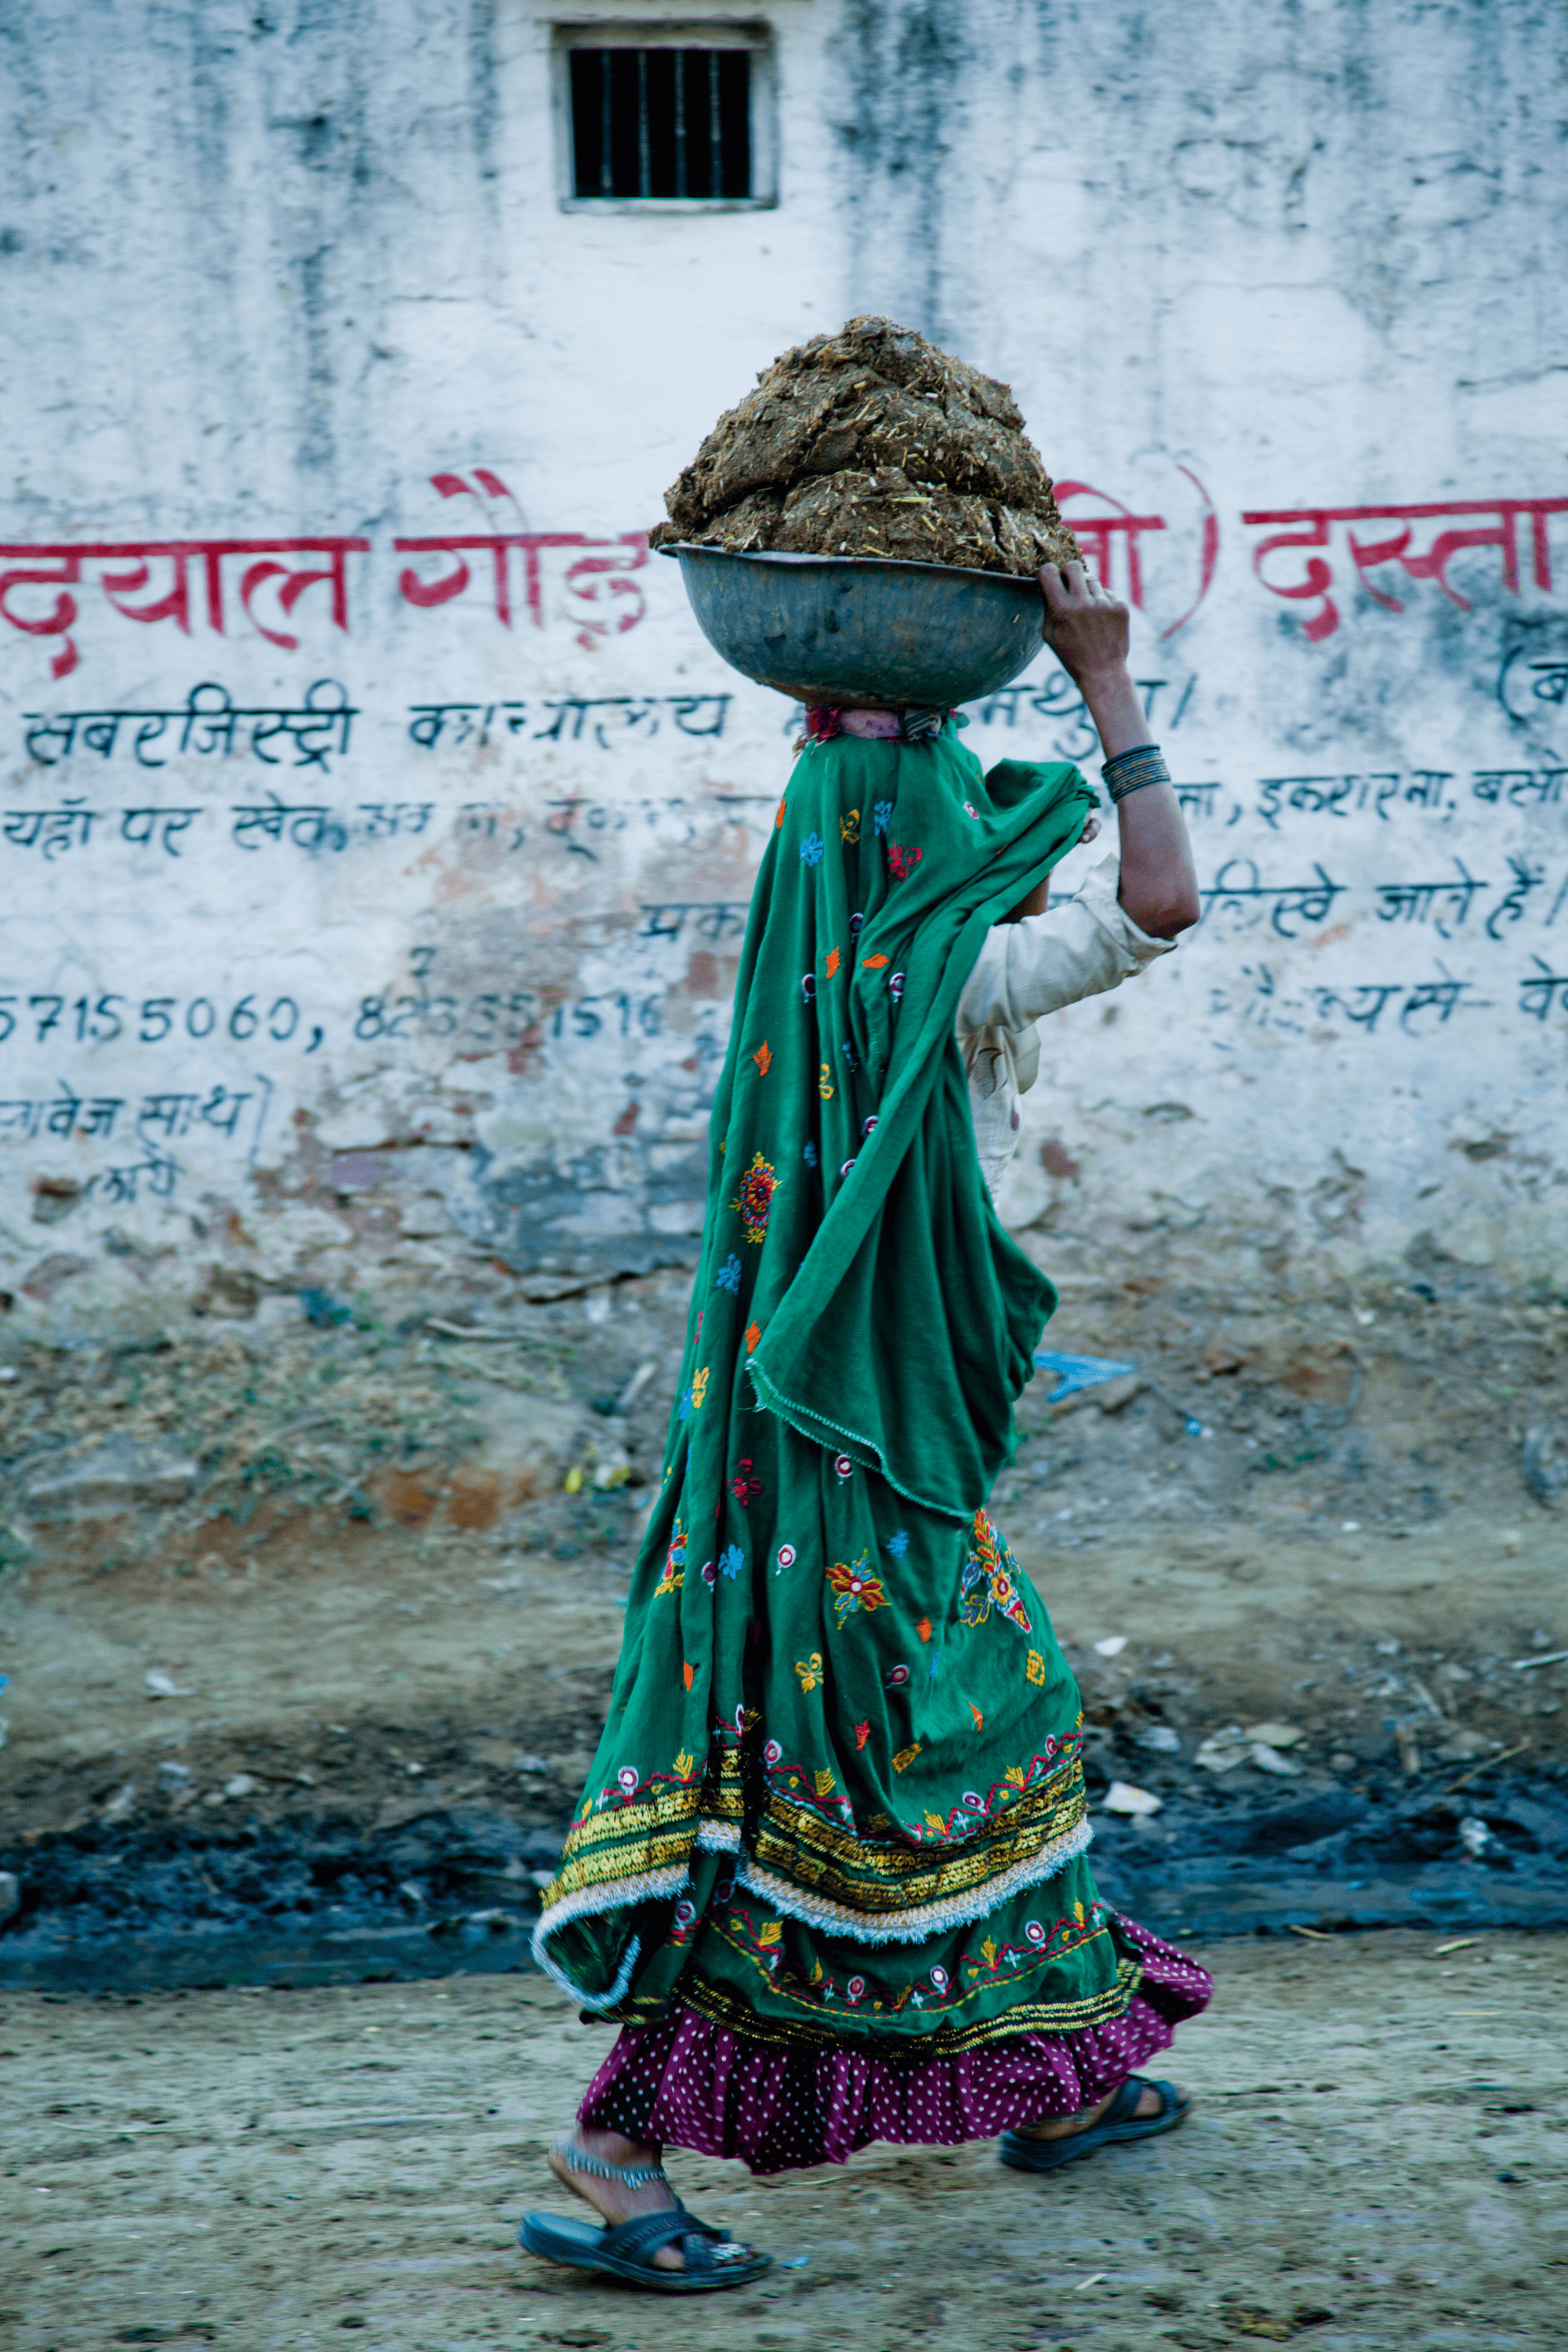 A woman carrying cow dung that she has collected for fuel #4/8